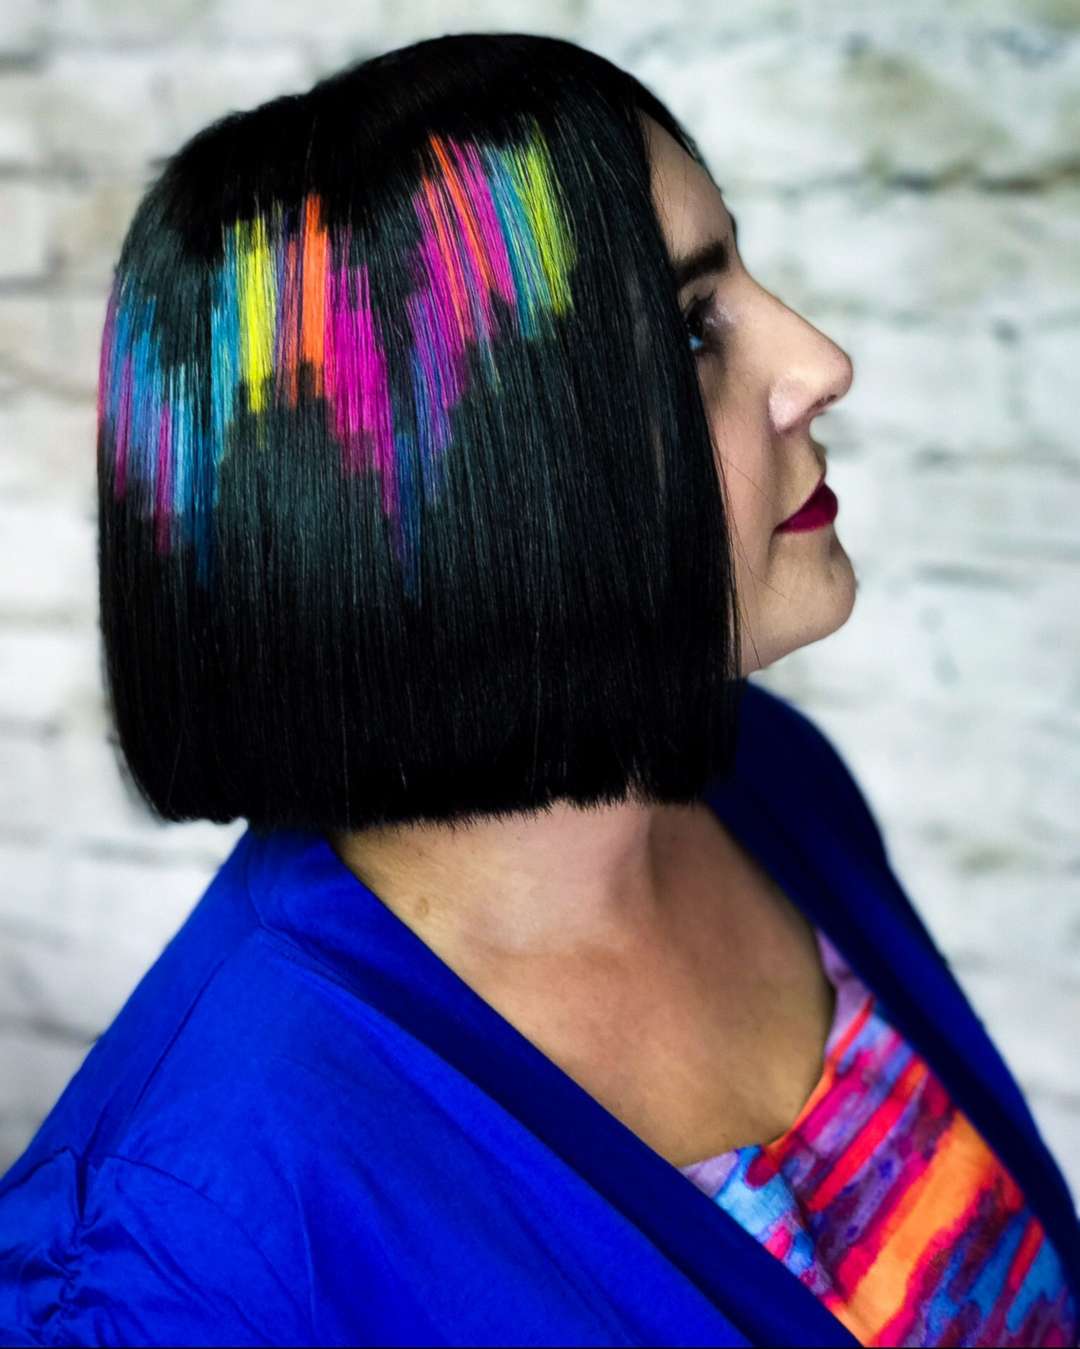 This pixelated hair is mesmerizing - ABC News